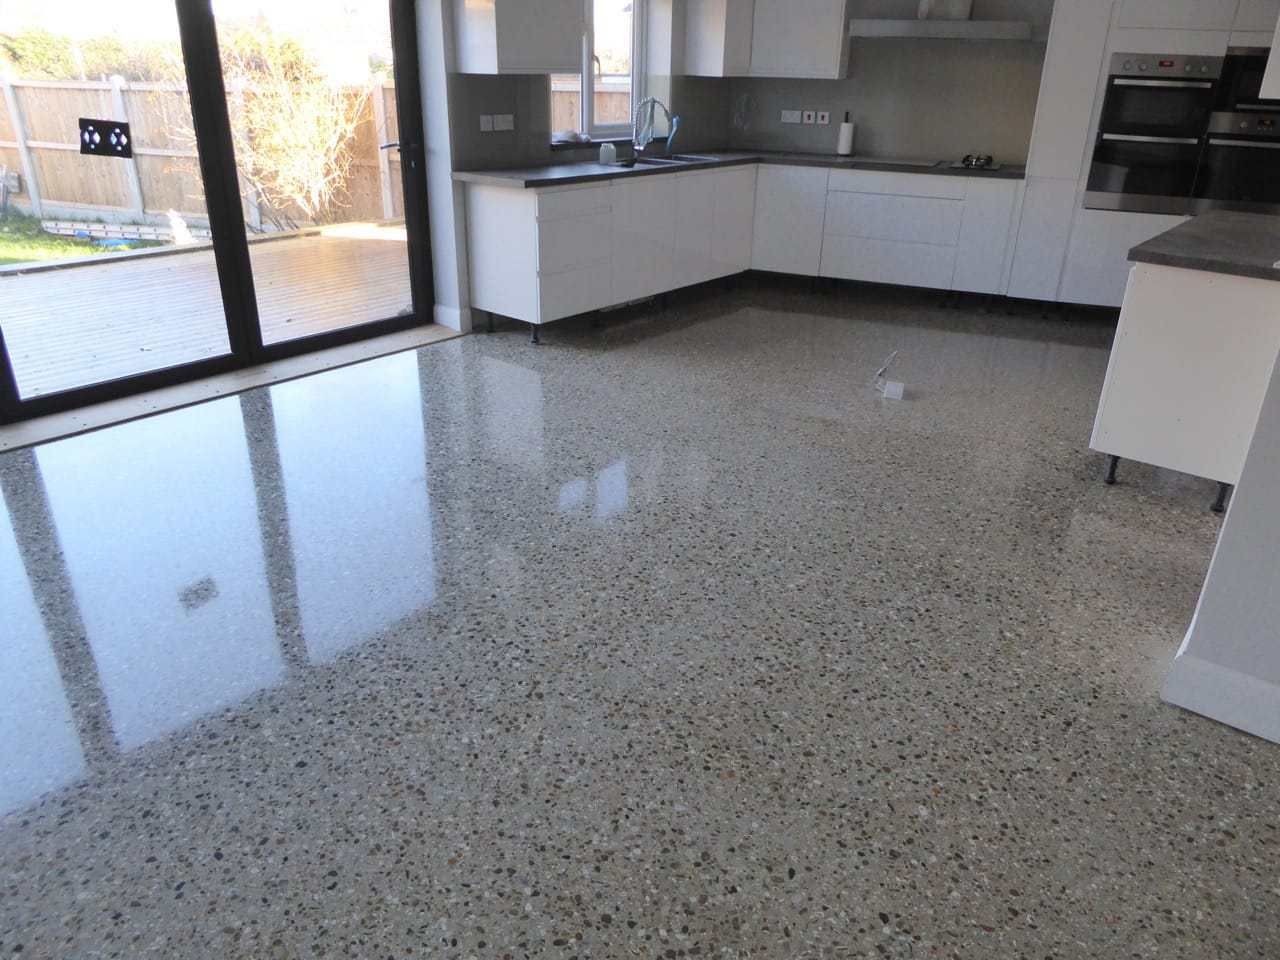 Polished Concrete Floors Can Make a Better Home: Here’s How - Hi Boox